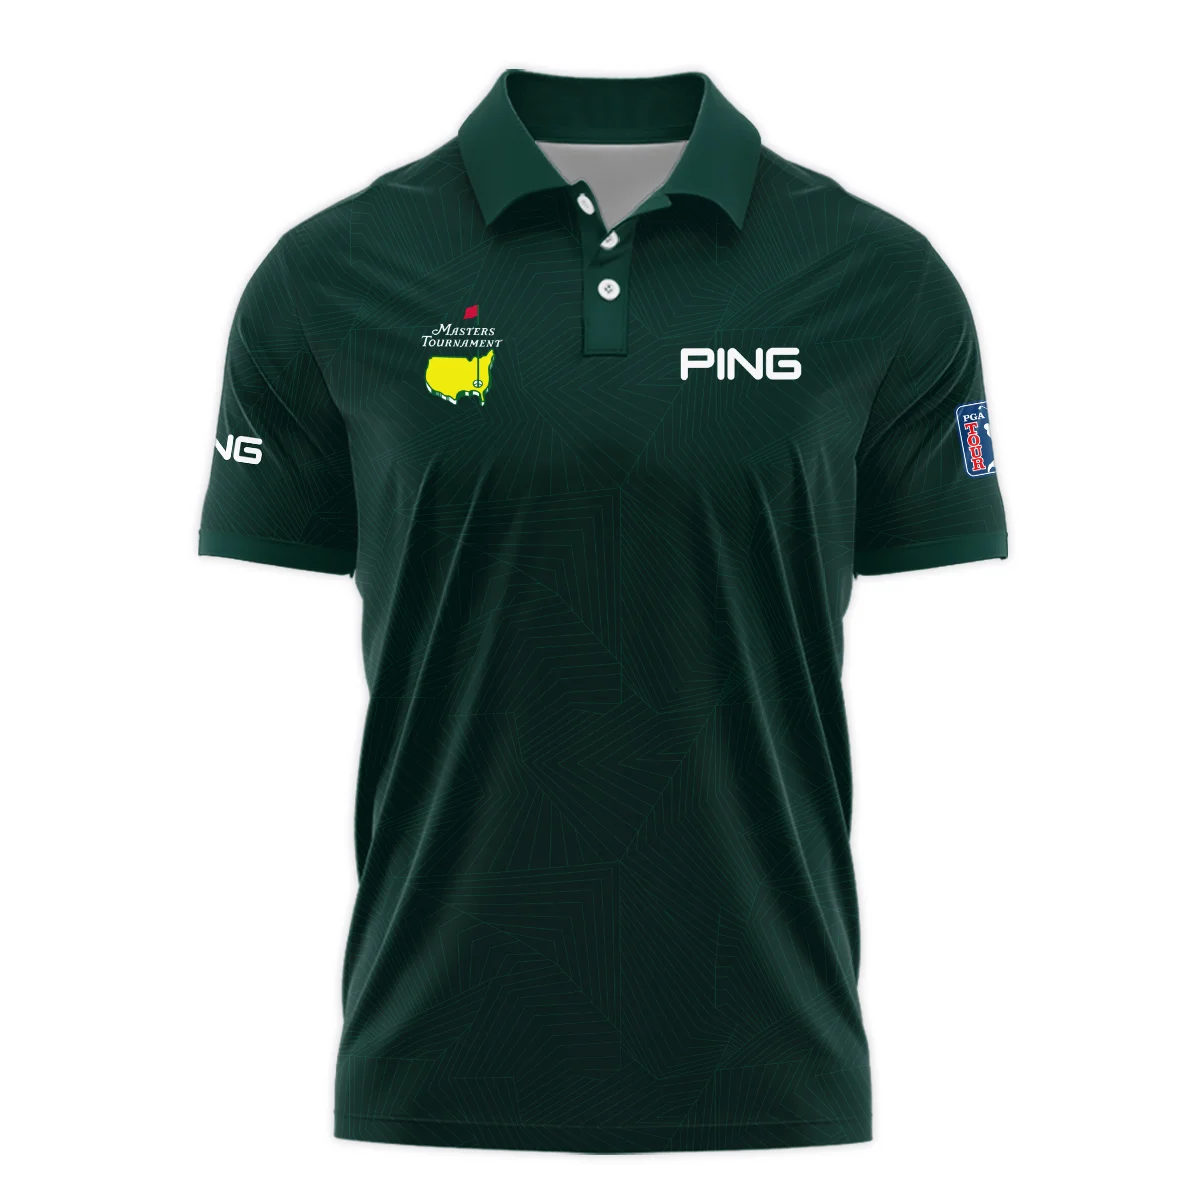 Masters Tournament Ping Pattern Sport Jersey Dark Green Vneck Polo Shirt Style Classic Polo Shirt For Men